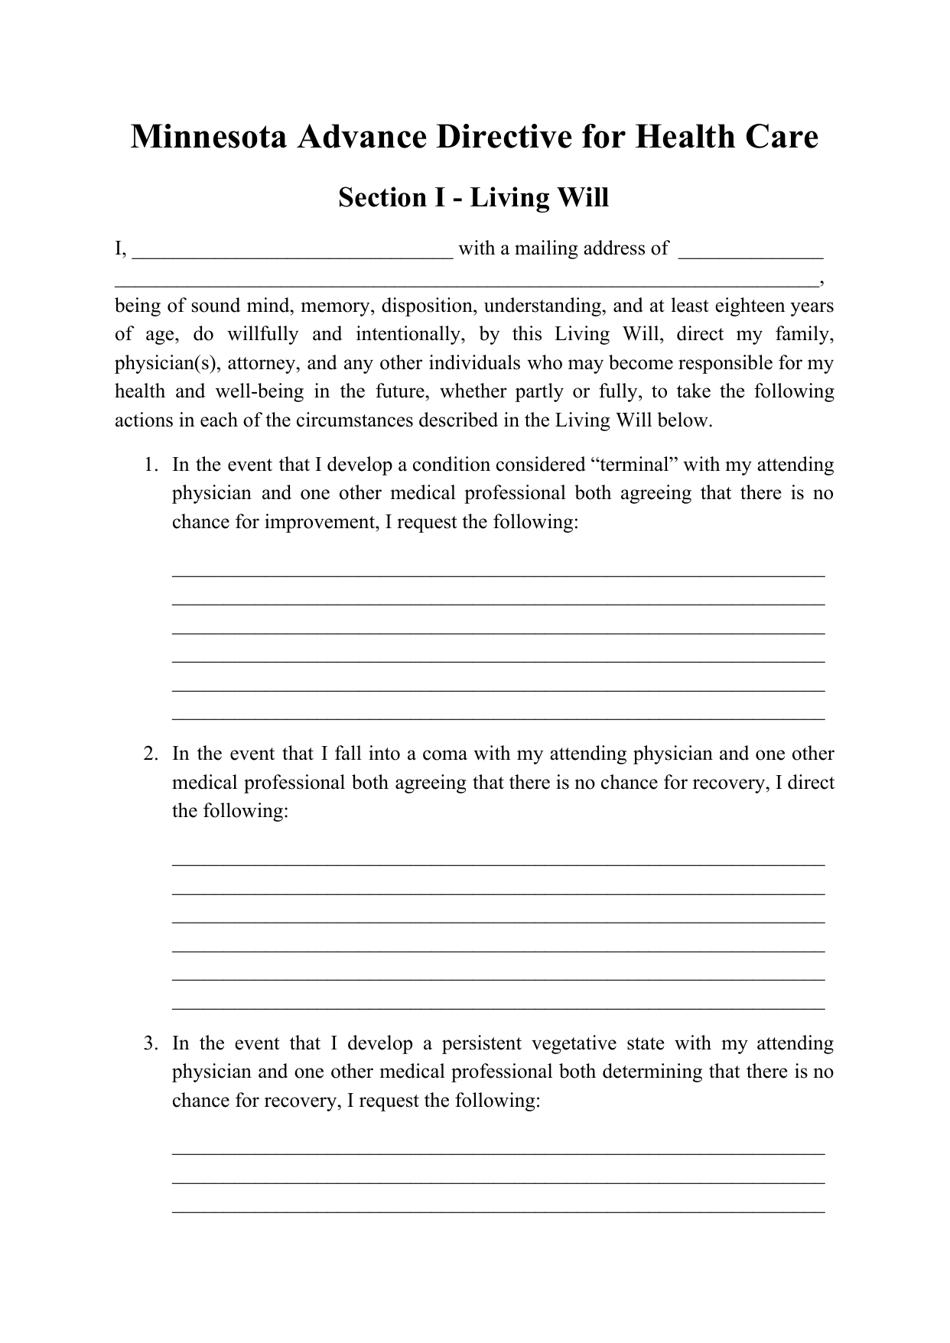 Advance Directive for Health Care Form - Minnesota, Page 1